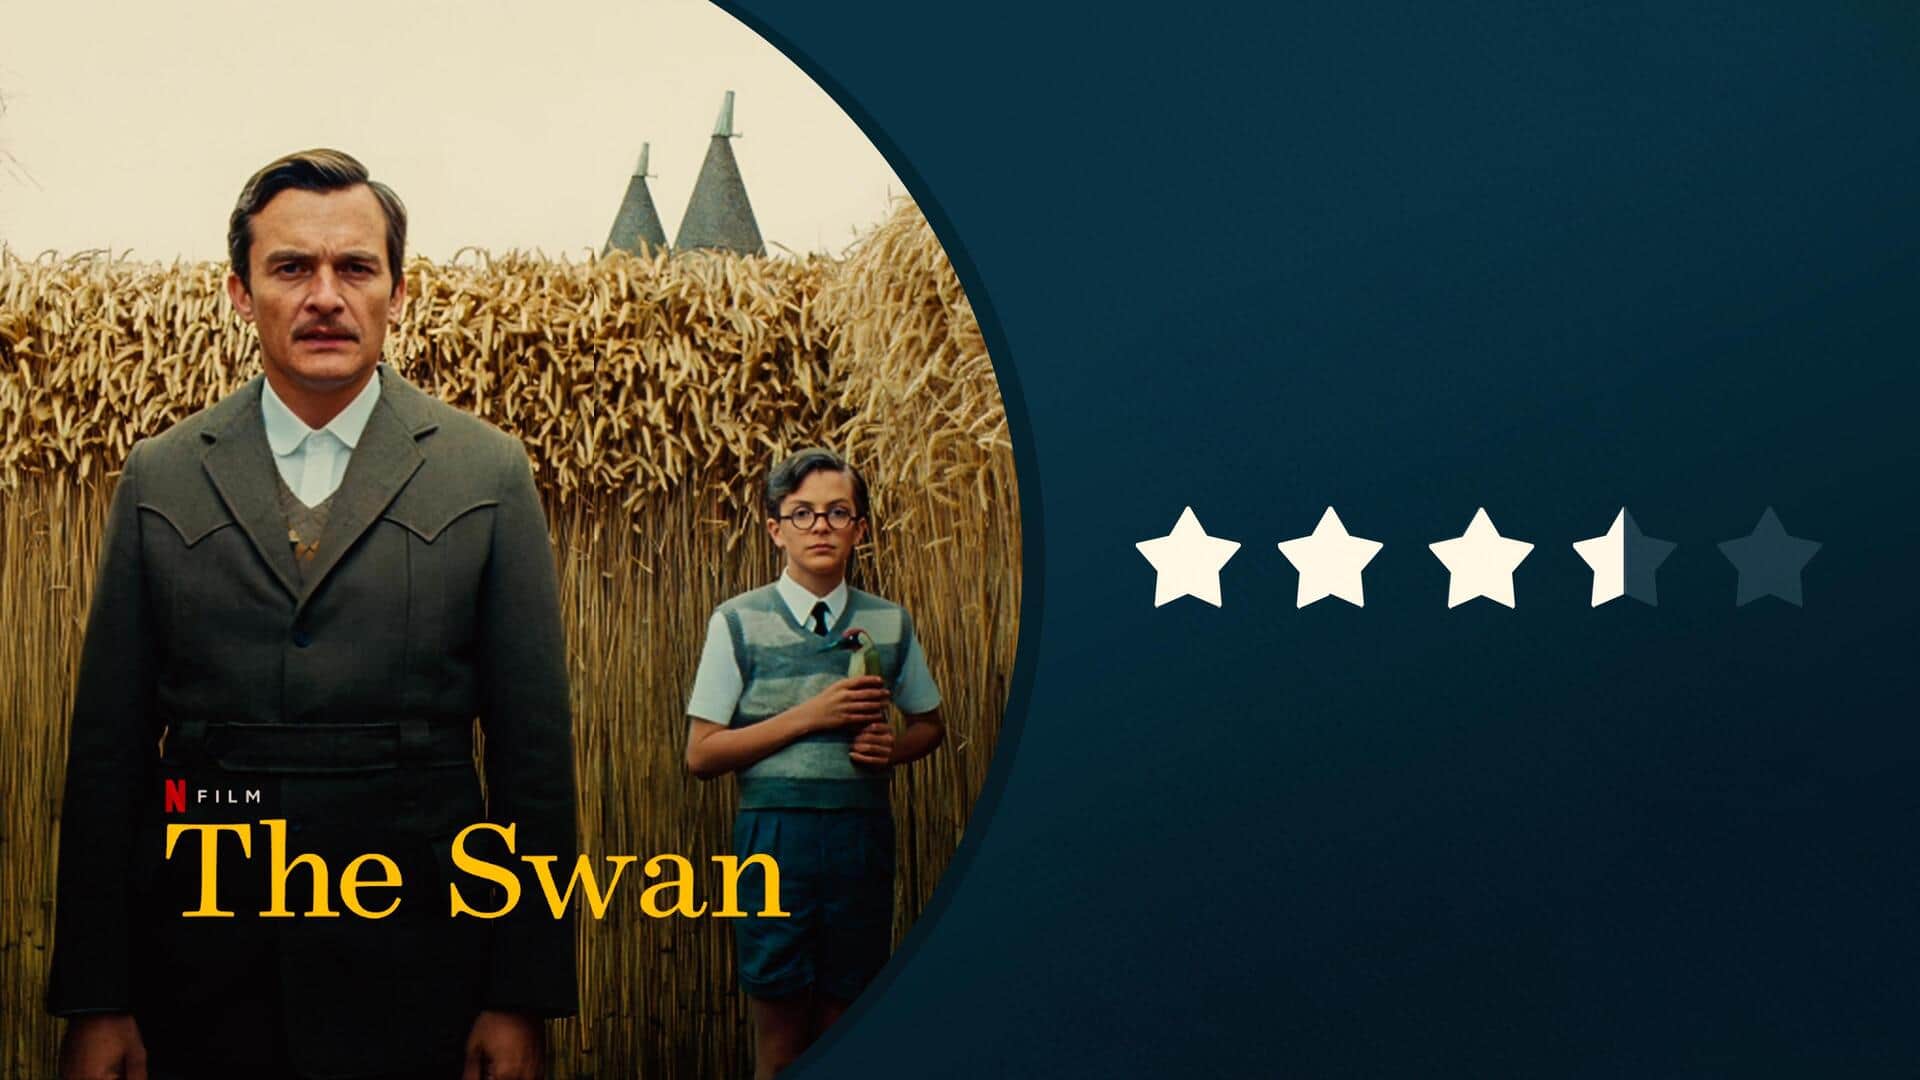 'The Swan' review: Short film is charming, inventive, and fast-paced